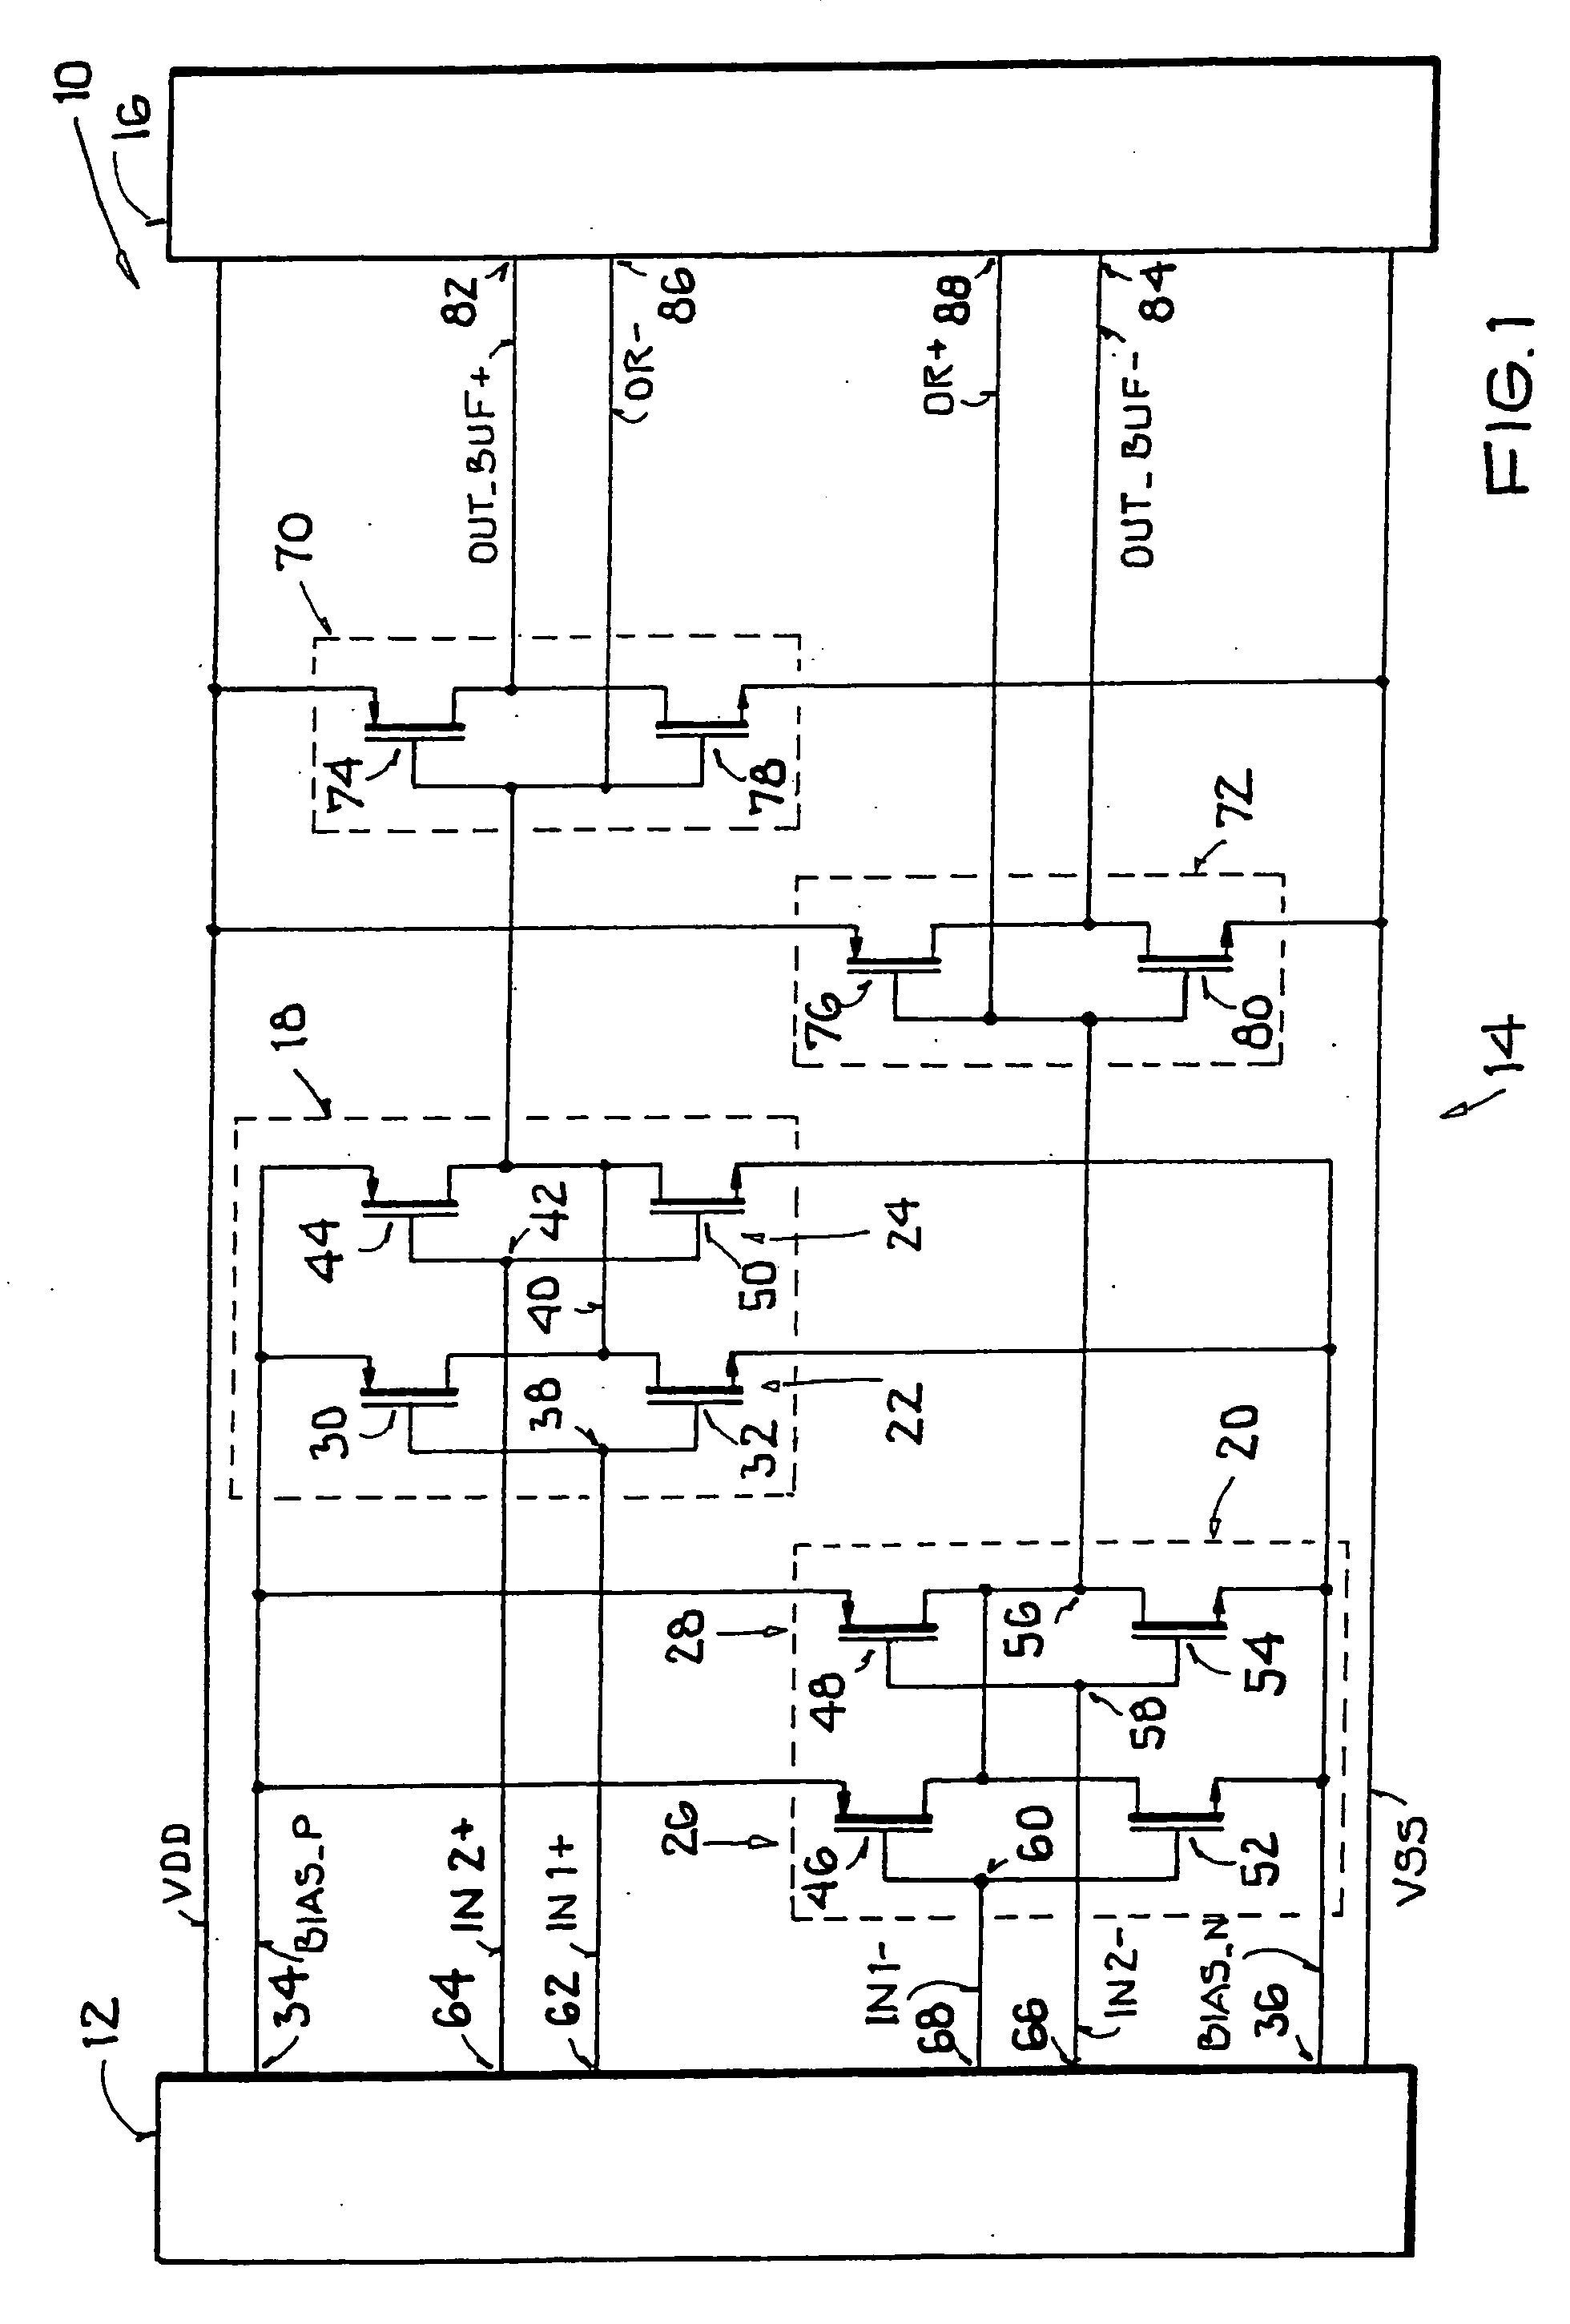 Circuit with at least one delay cell